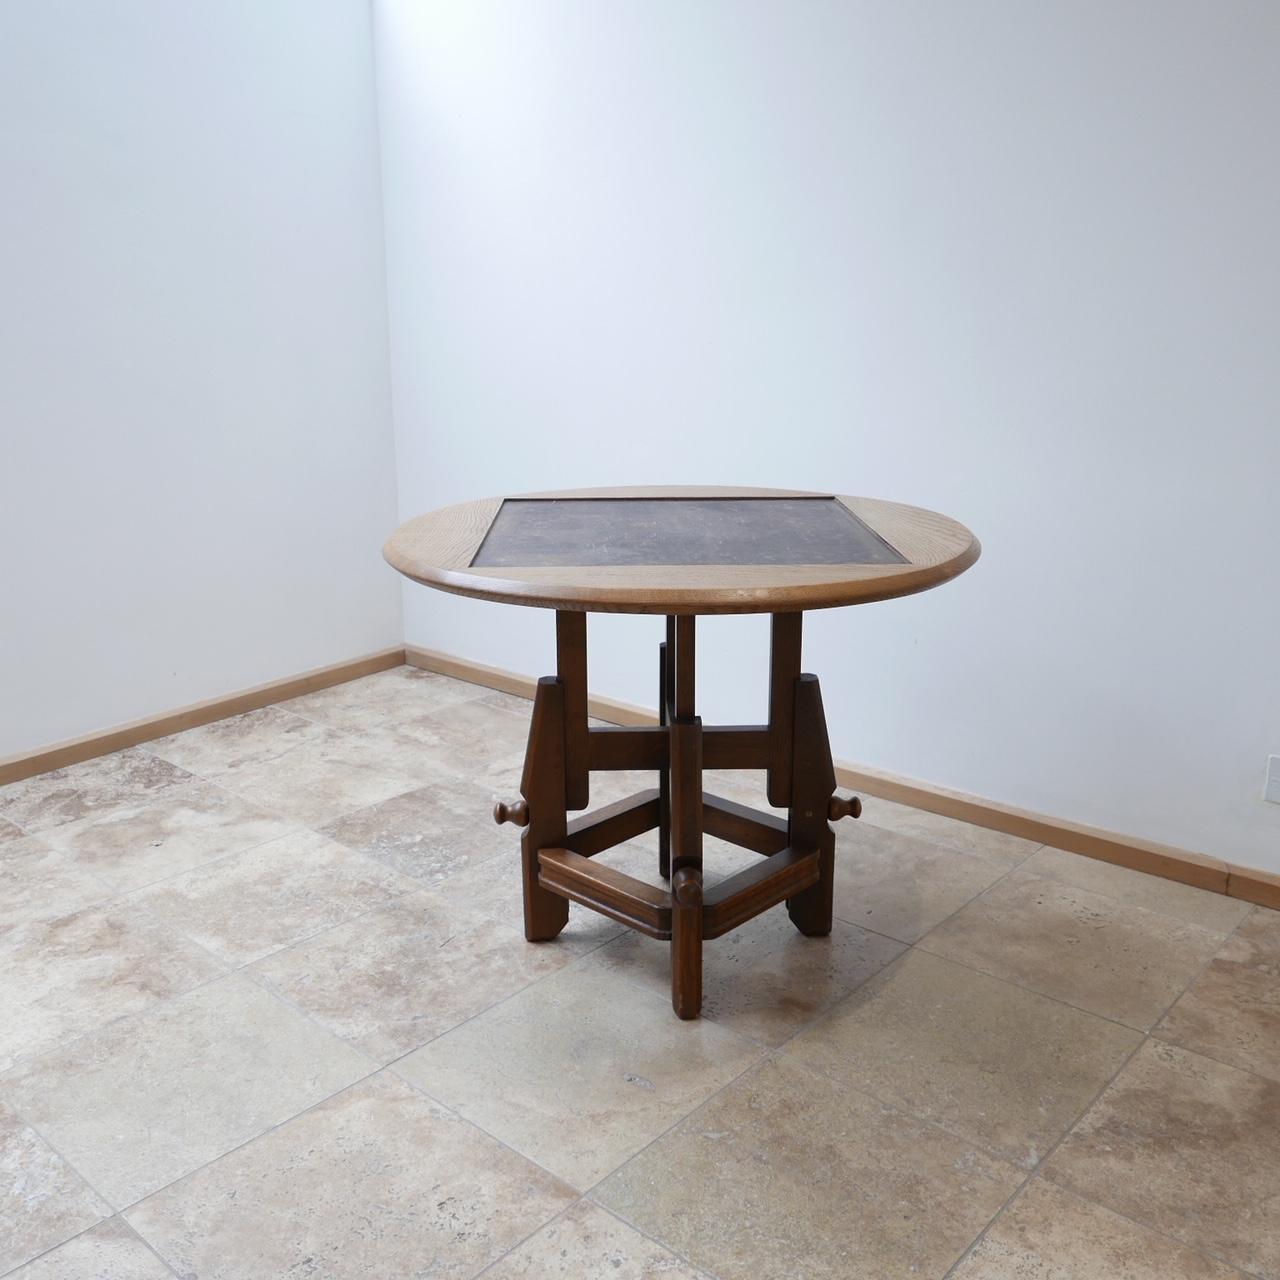 French, midcentury adjustable coffee to dining table,

circa 1960s by design legends Guillerme et Chambron.

Oak, originally would have had ceramics, these are lacking so can be replaced with mirrored glass, marble, smoked glass etc. to